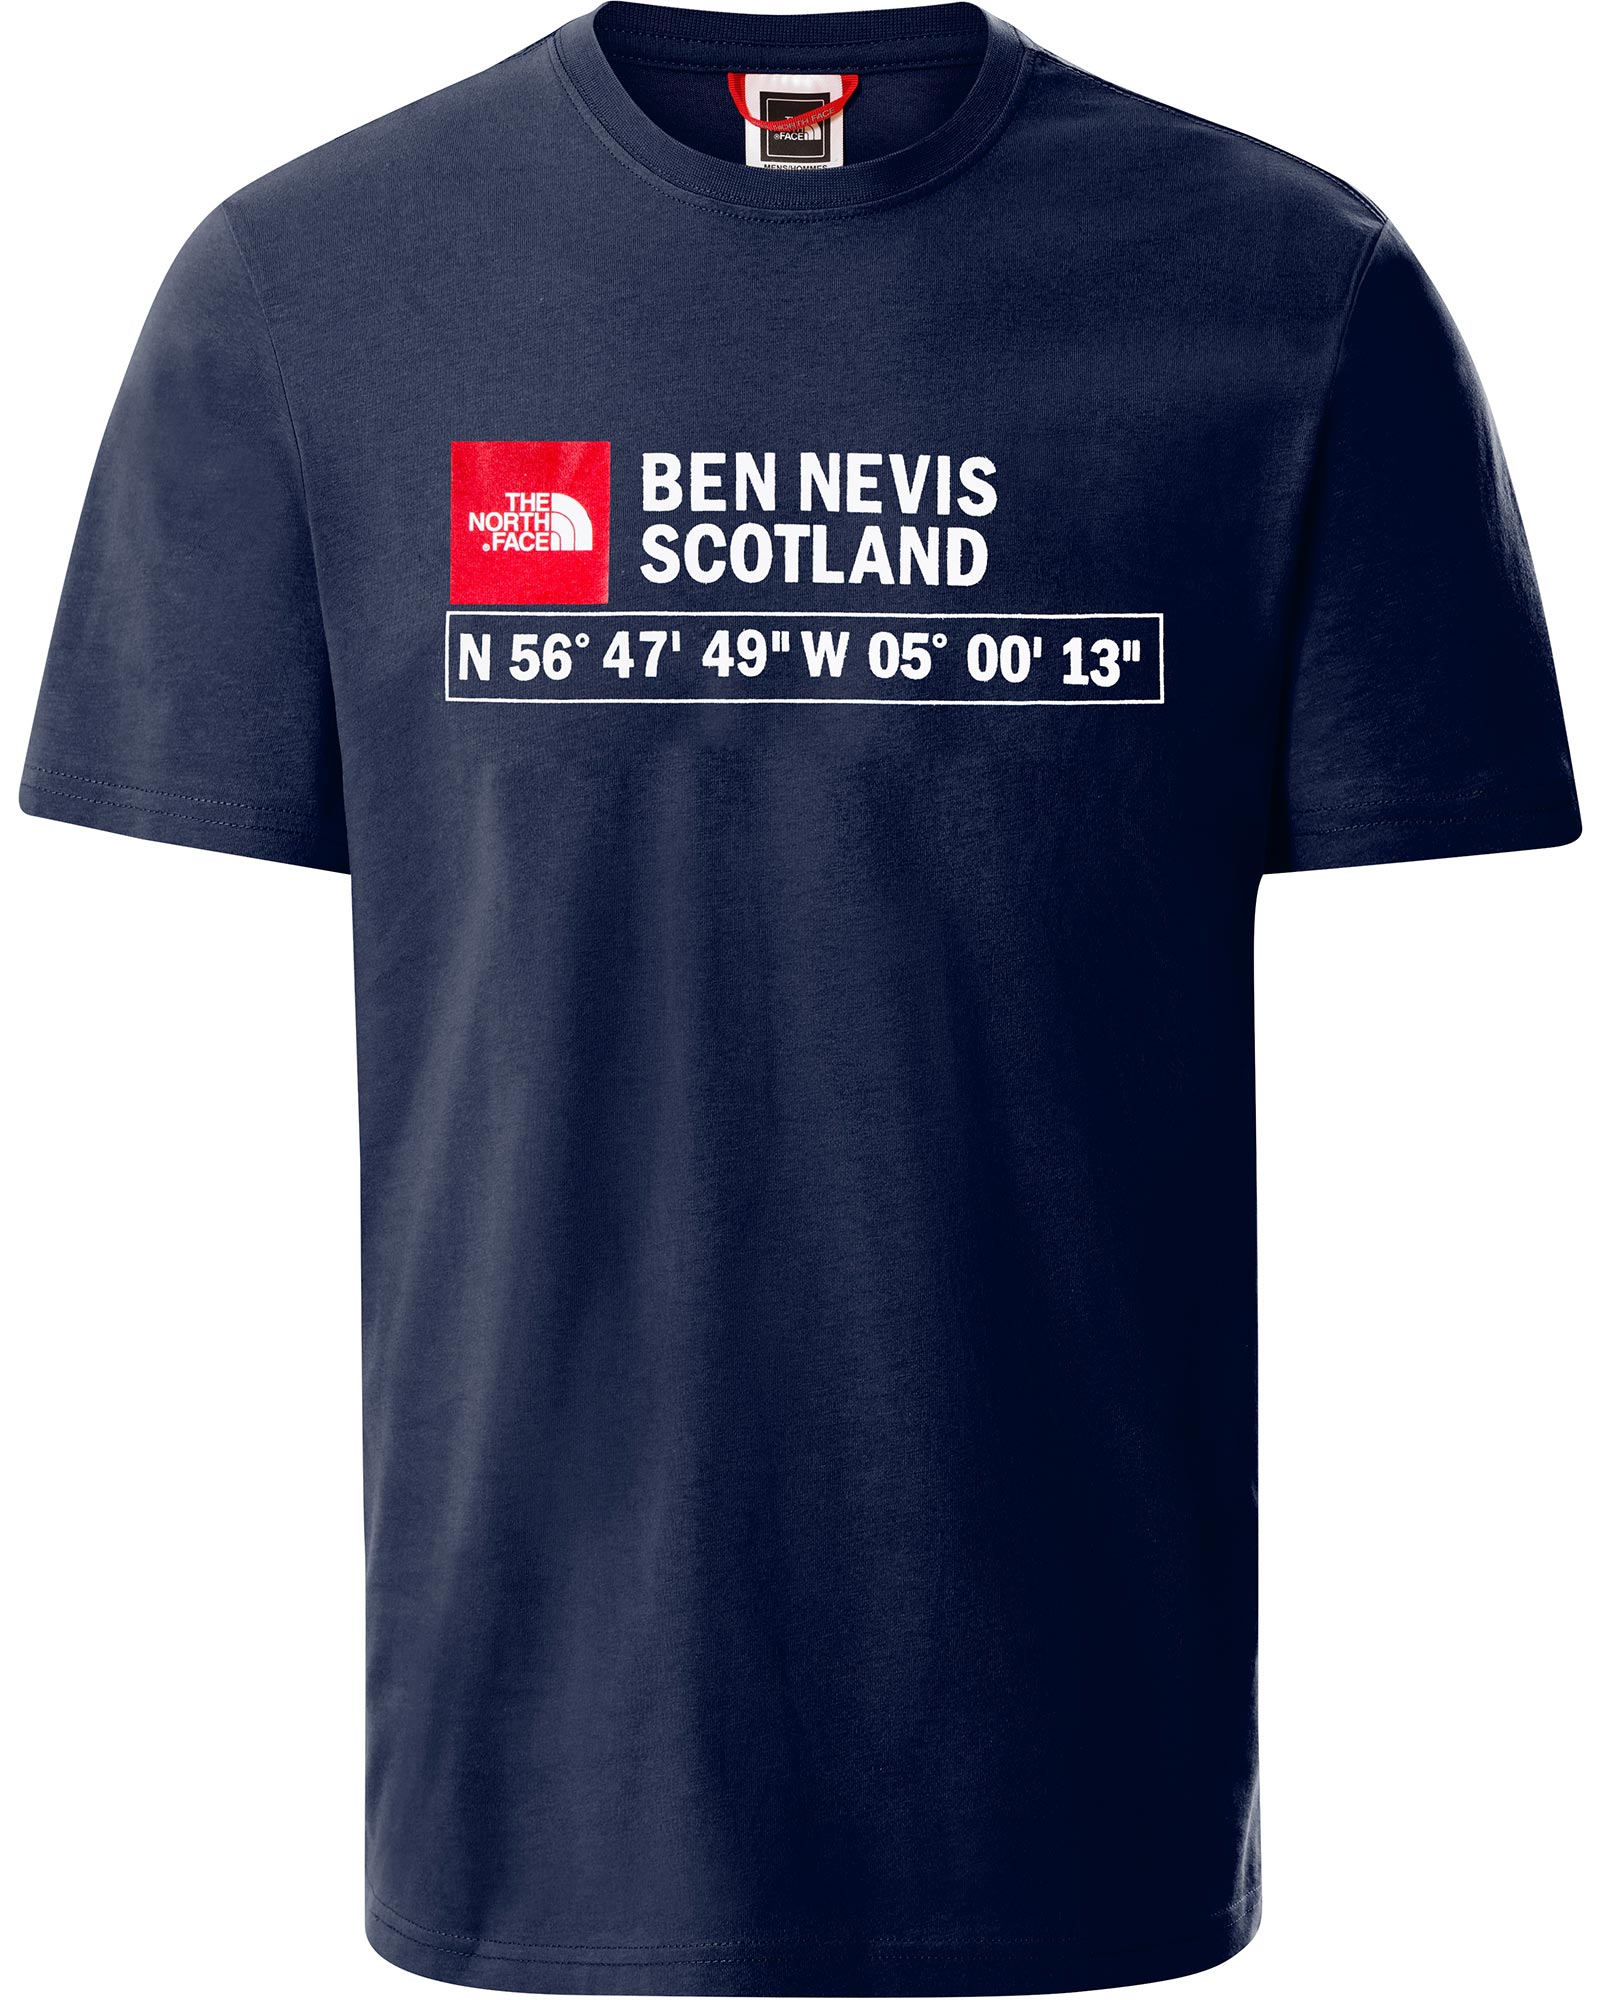 Product image of The North Face Ben Nevis GPS Logo Men's T-Shirt